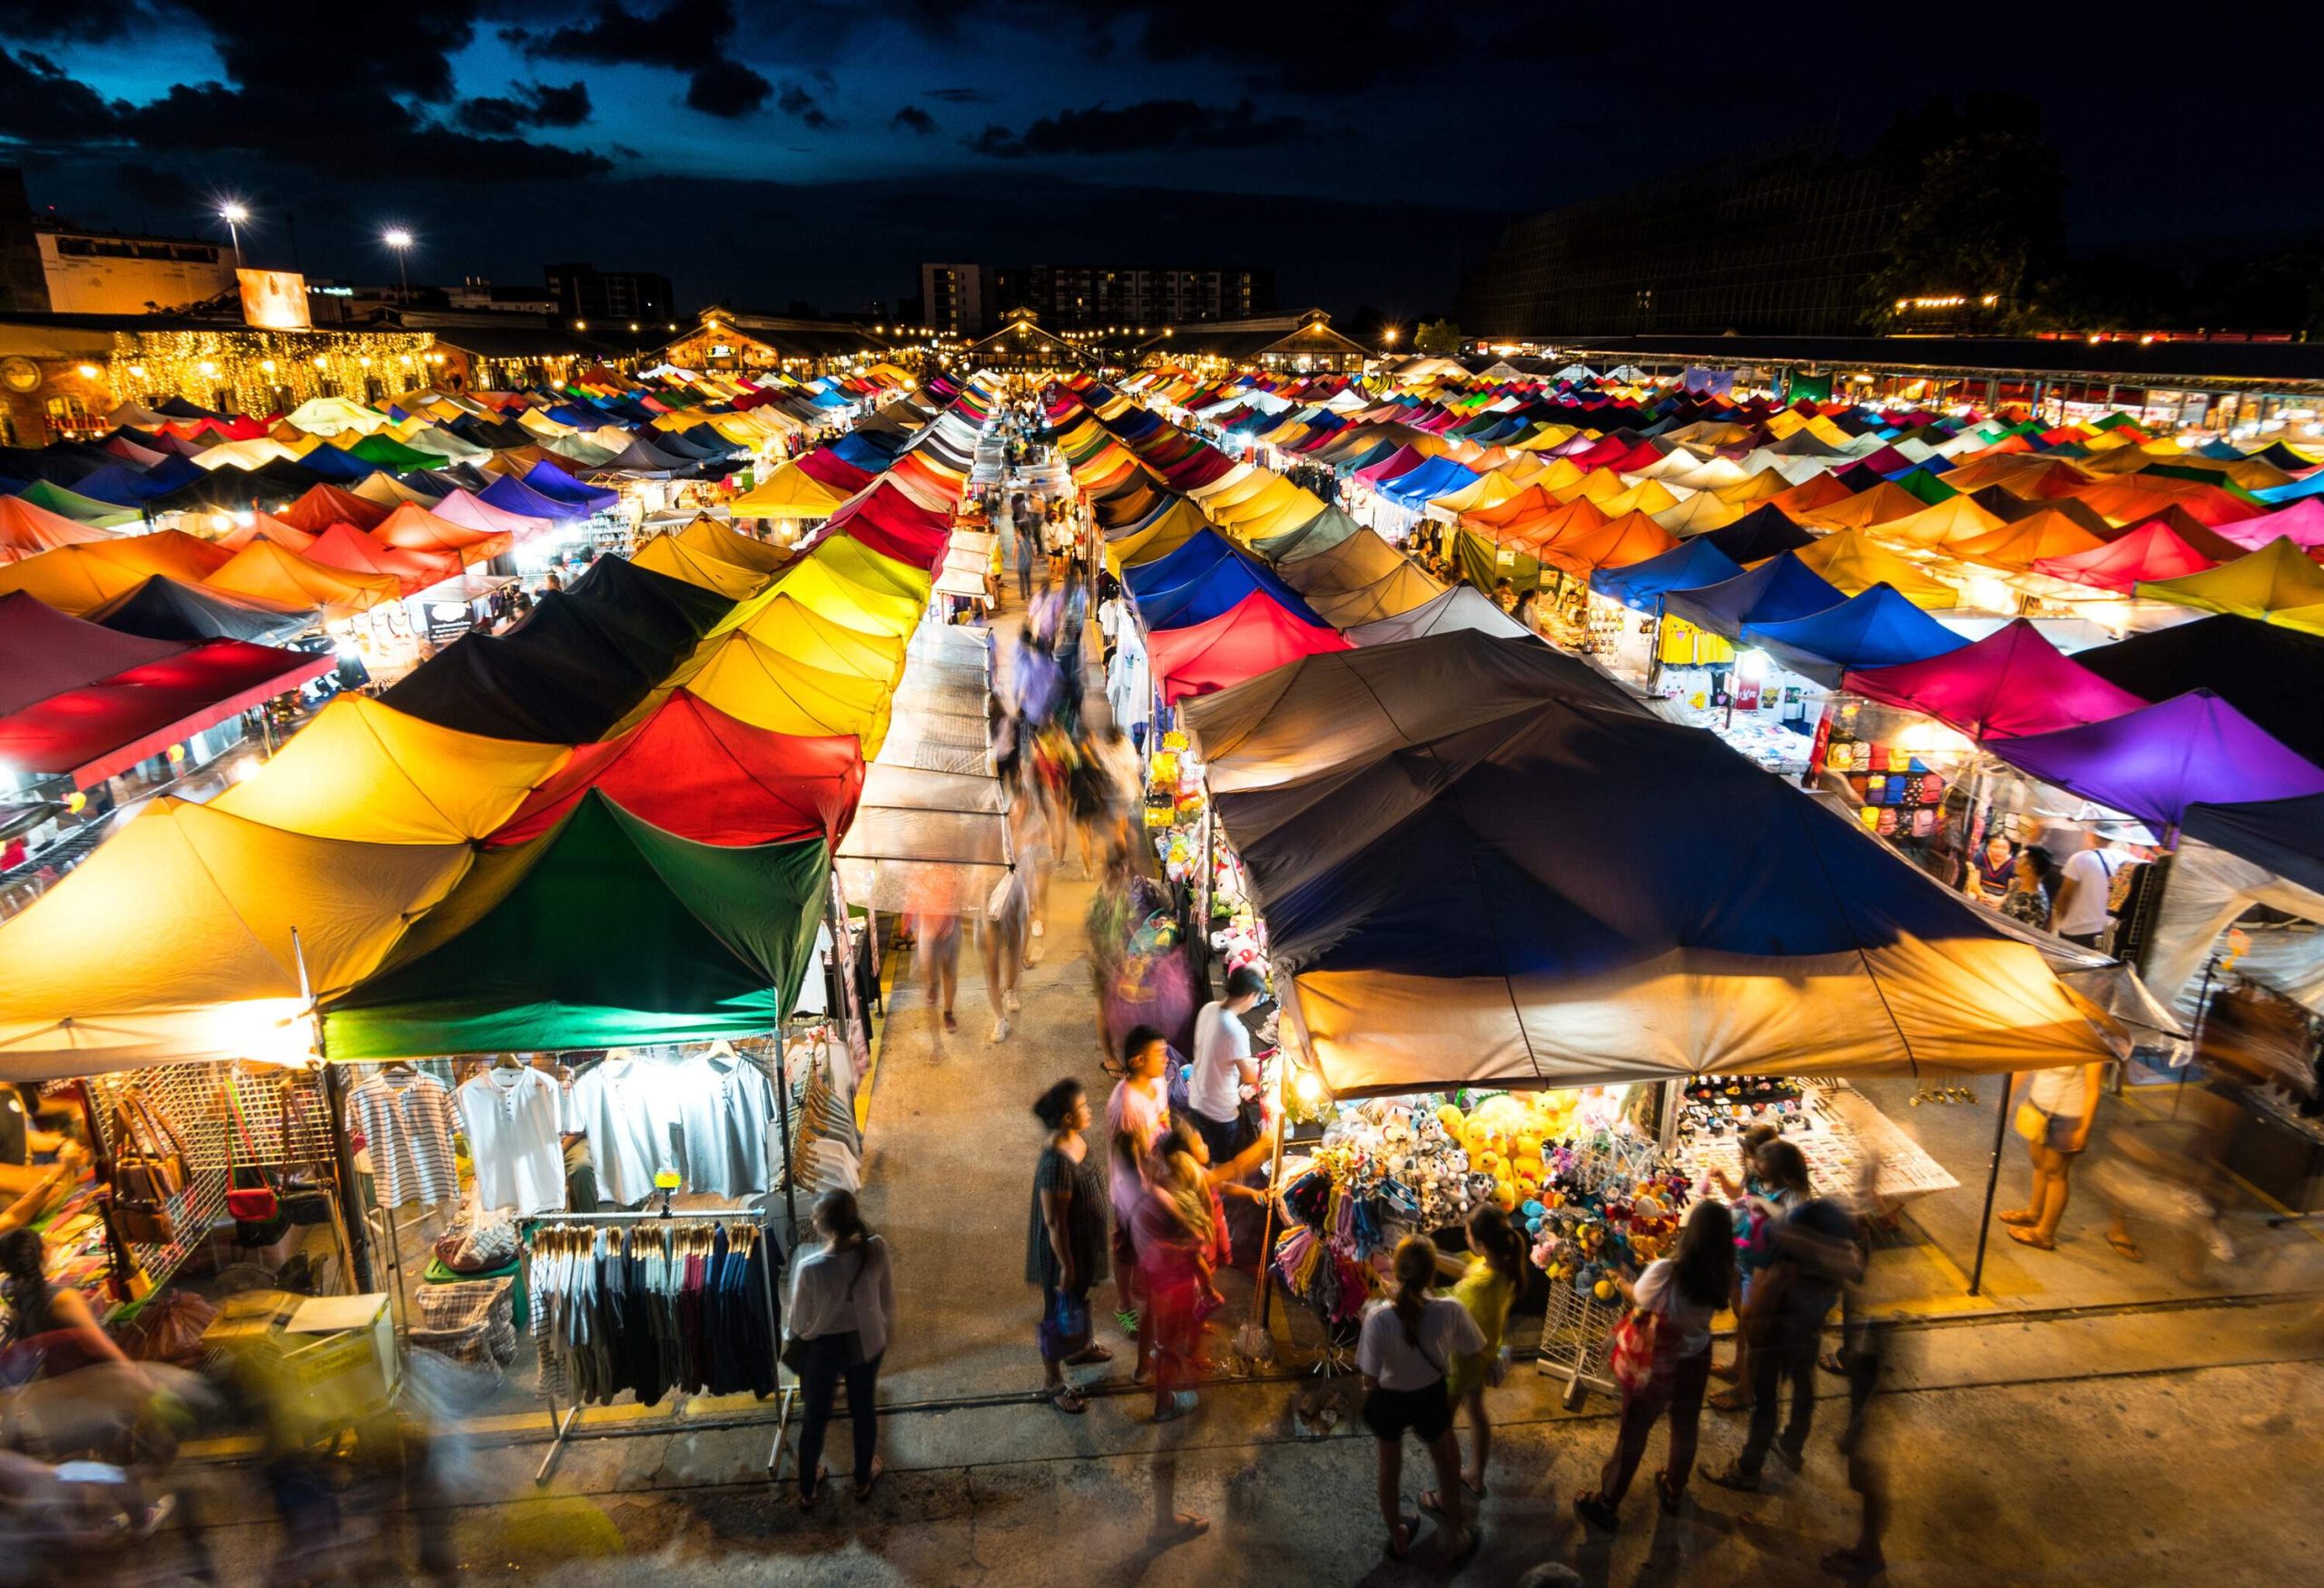 A bustling crowd outside the colourful and brightly illuminated market stalls.